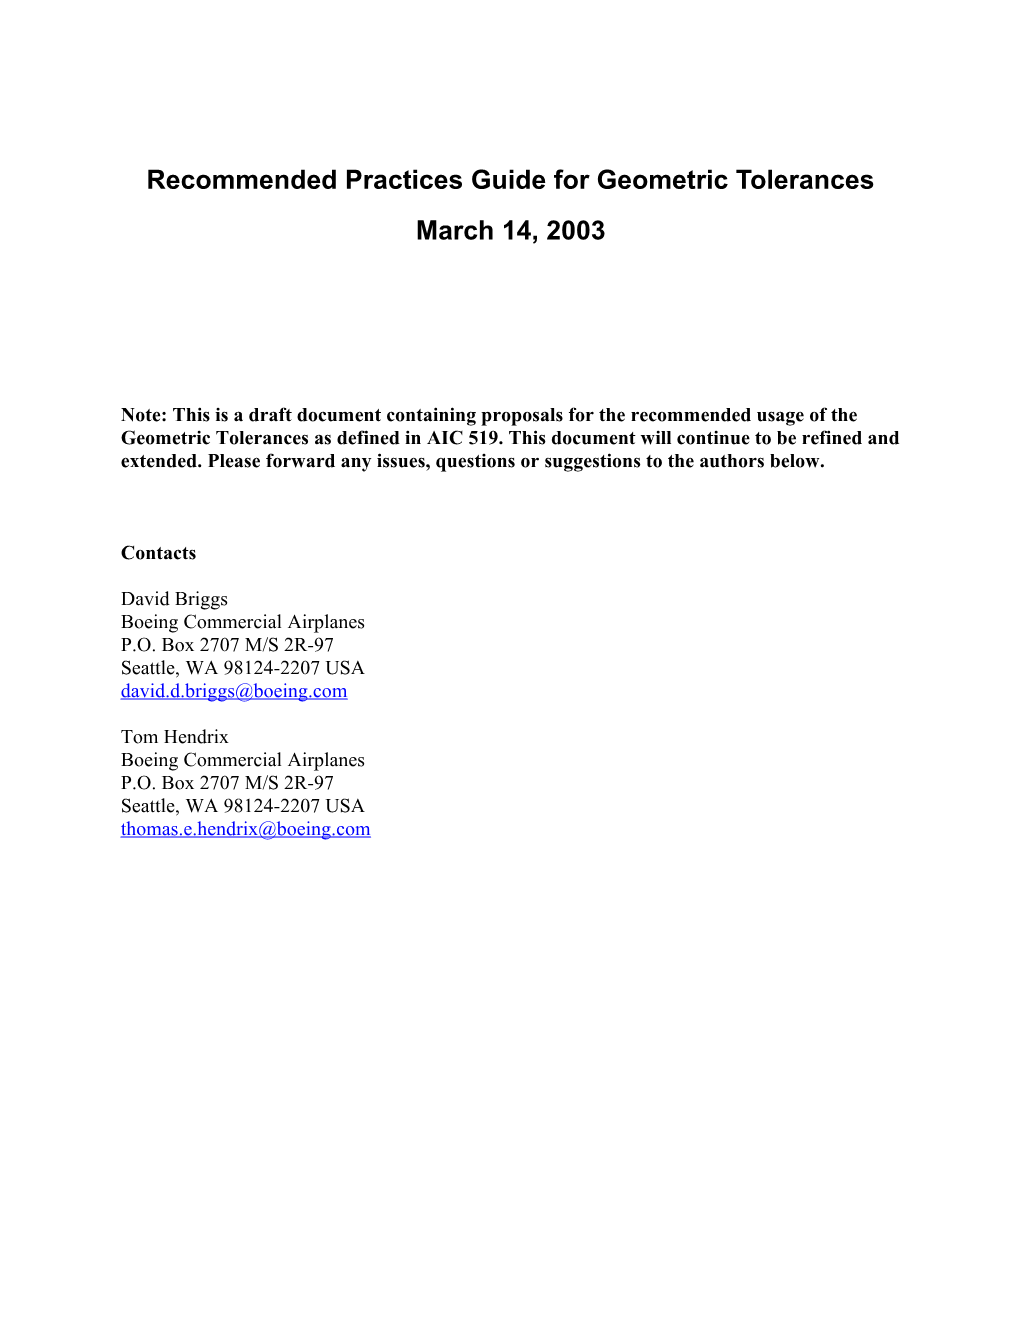 Recommended Practices Guide for Geometric Dimensions and Tolerances